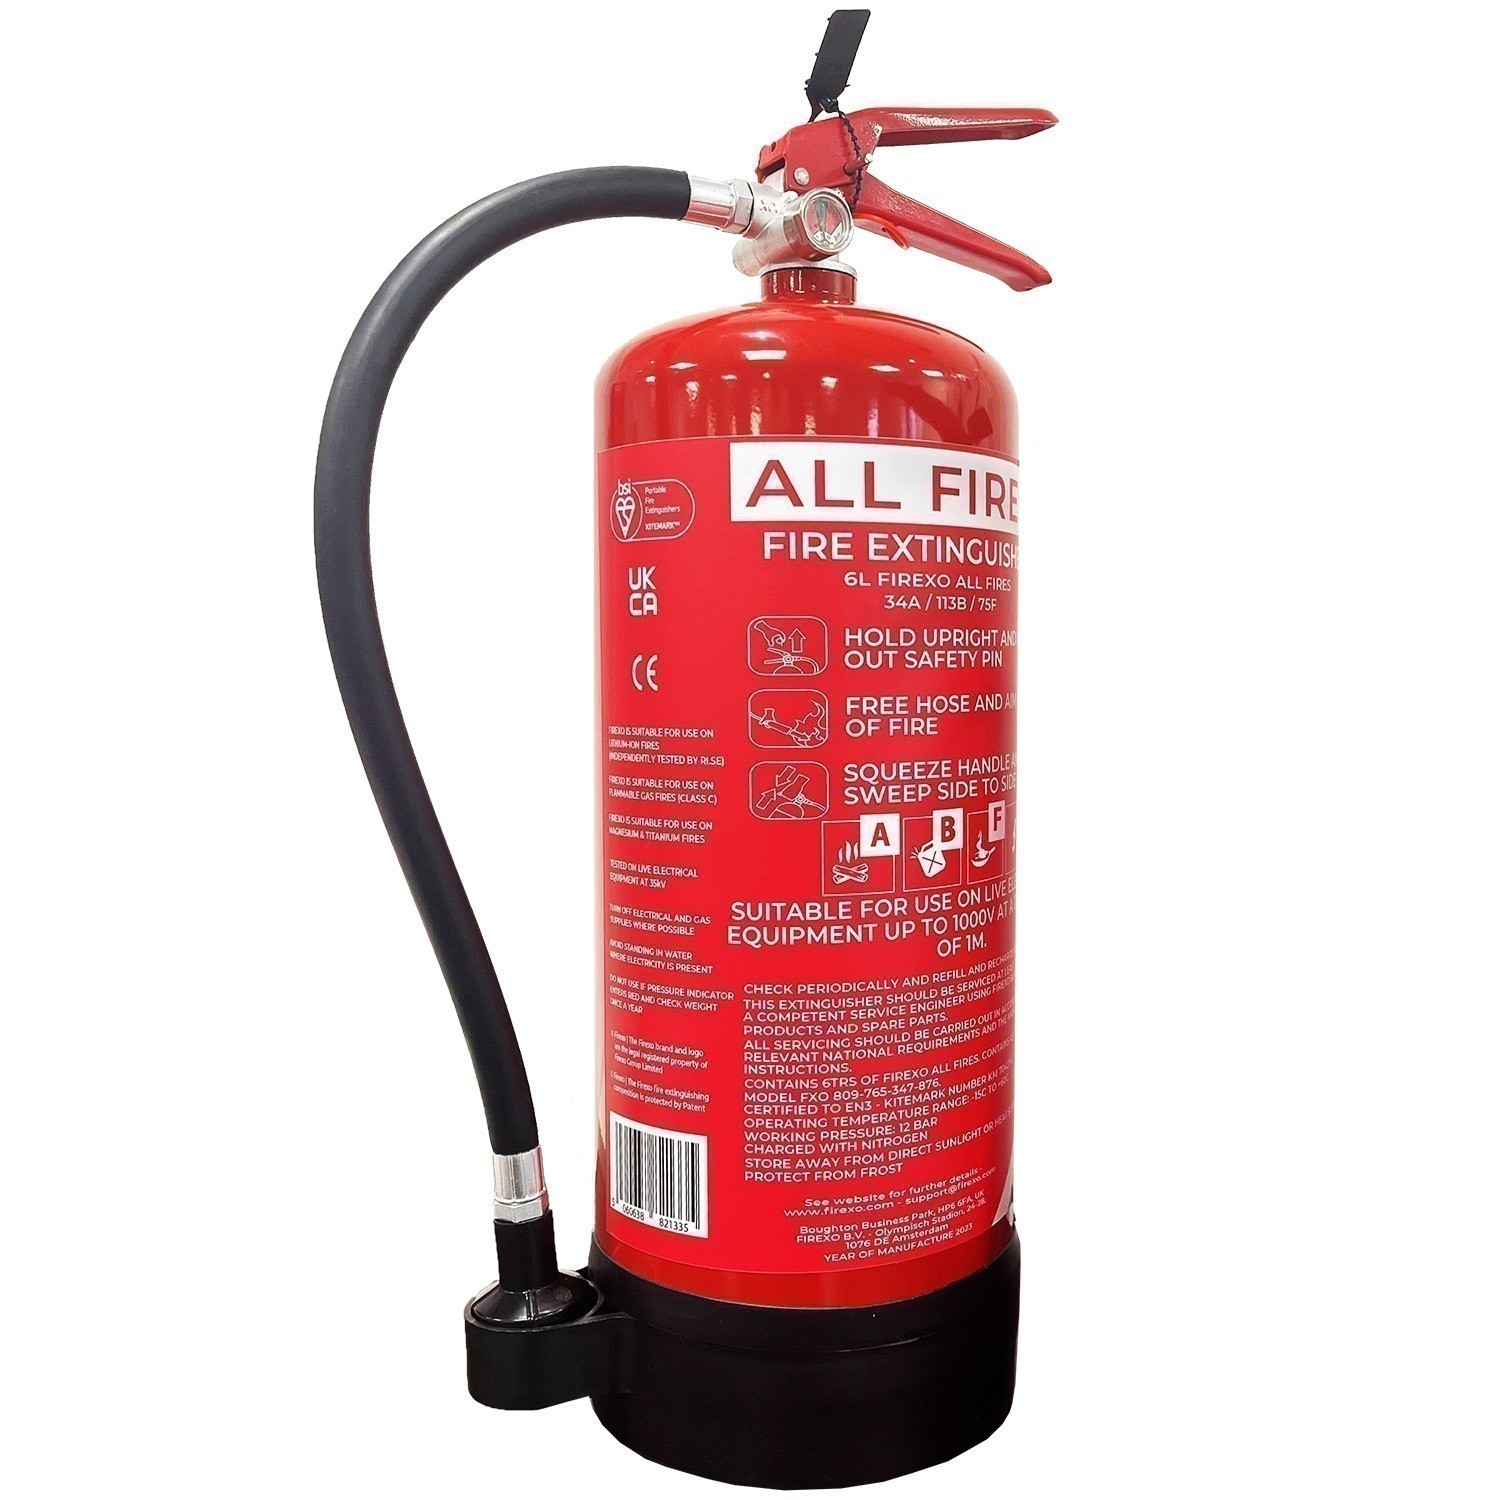 Firexo 6 litre All Fires Extinguisher